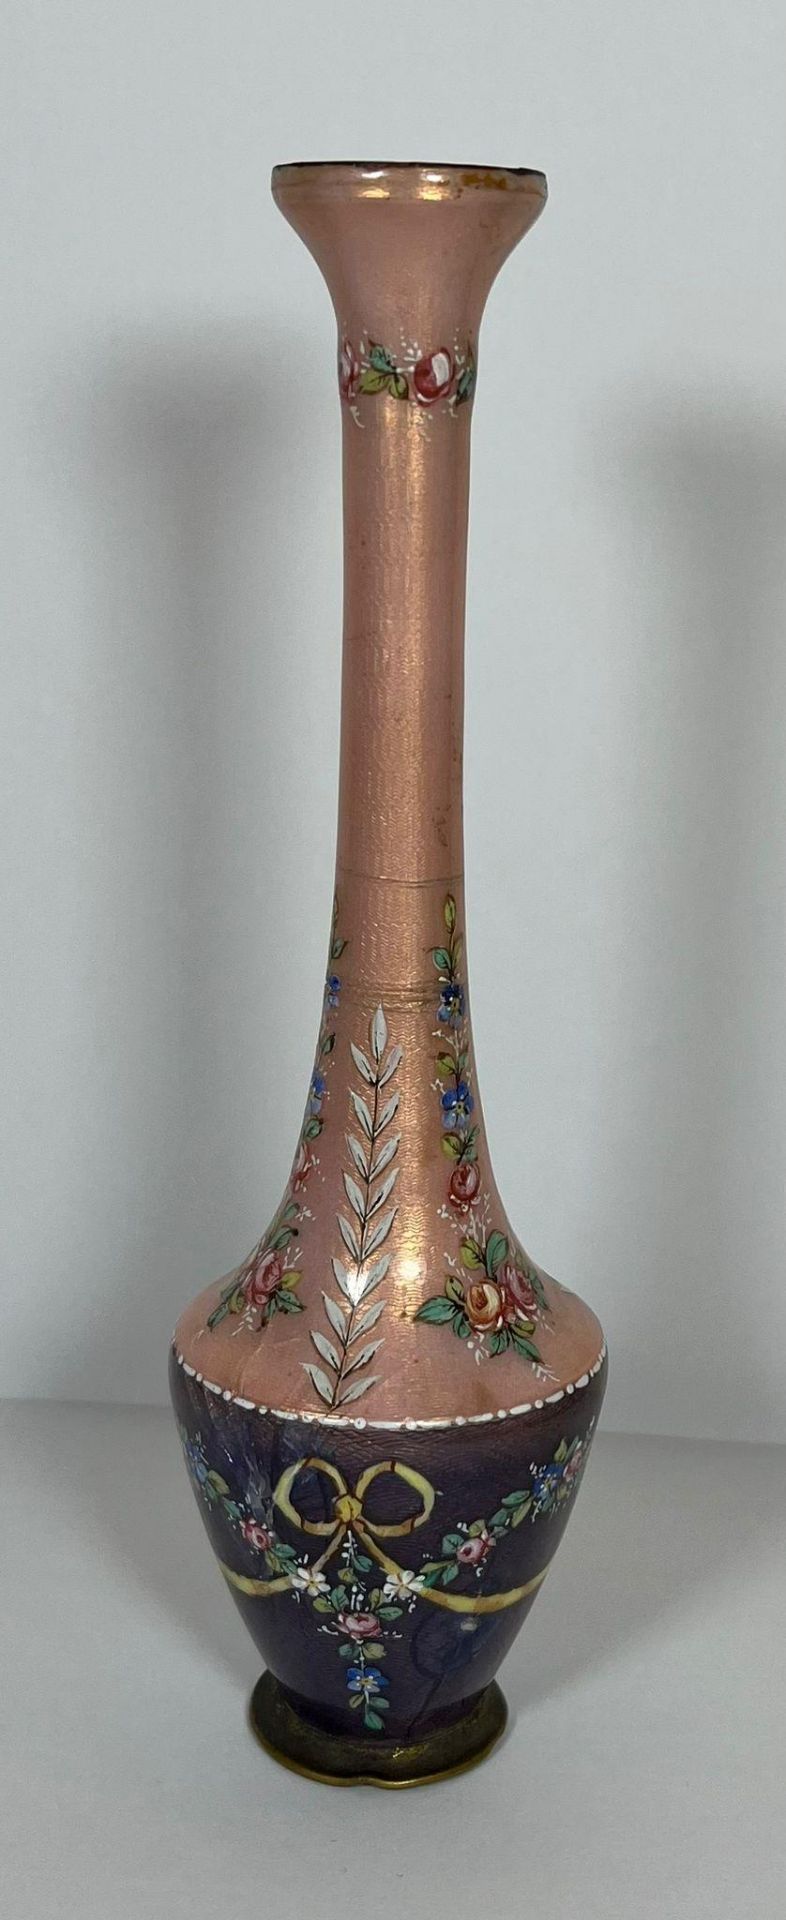 AN ANTIQUE EUROPEAN PINK & PURPLE ENAMEL DESIGN VASE DECORATED WITH FLORAL SWAG DESIGN, HEIGHT 15.